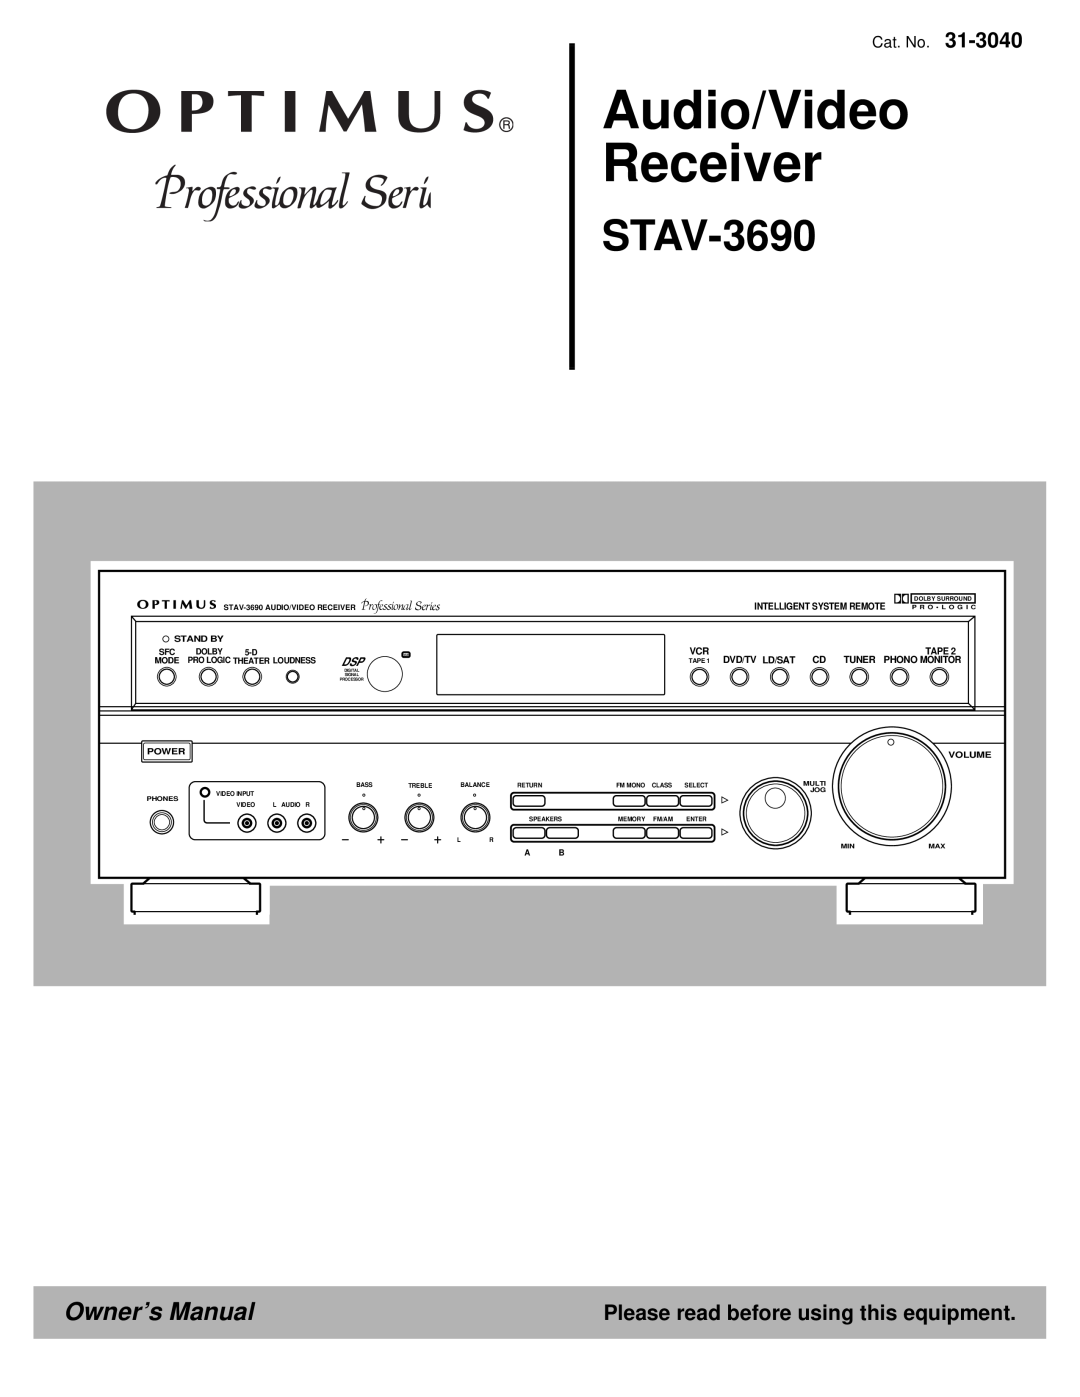 Optimus 31-3040 owner manual STAV-3690, Please read before using this equipment, Audio/Video Receiver, Stand By, Dolby 